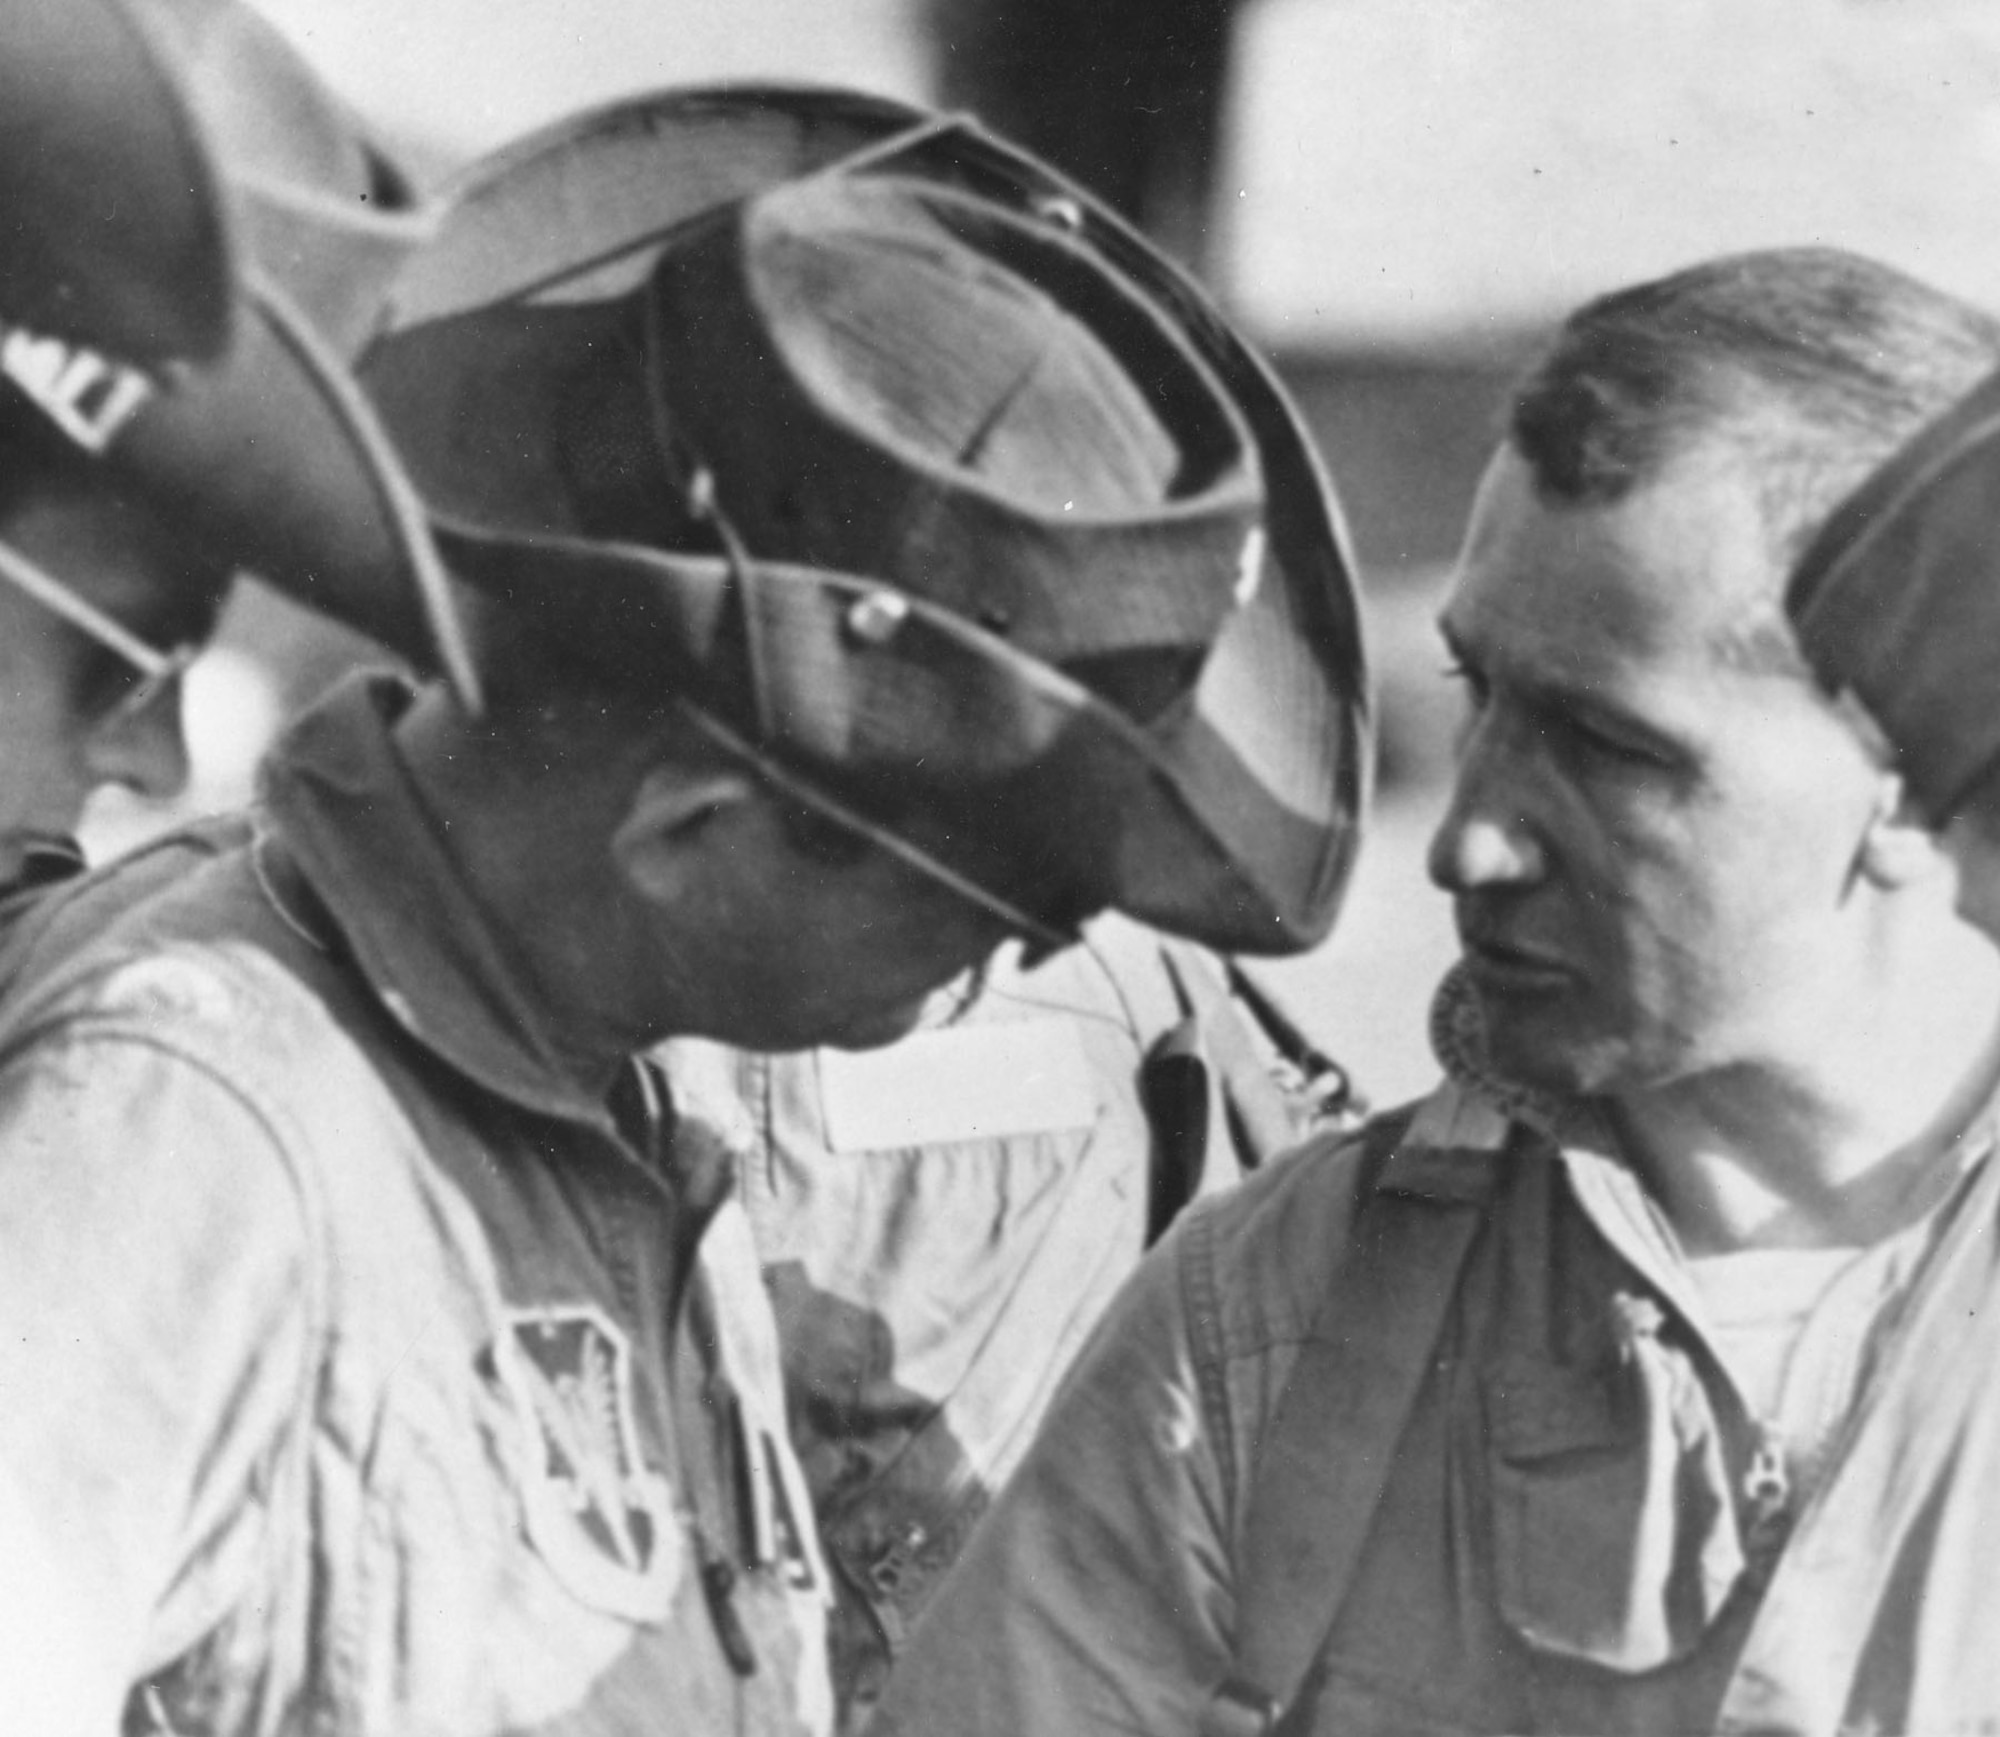 Maj. Willard (l) talking to Capt. Lamb on the flightline at Korat on March 4, 1966.  Lamb had just landed from a mission in which he and Capt. Frank O’Donnell had destroyed a SAM site (the third for Lamb). (U.S. Air Force photo)